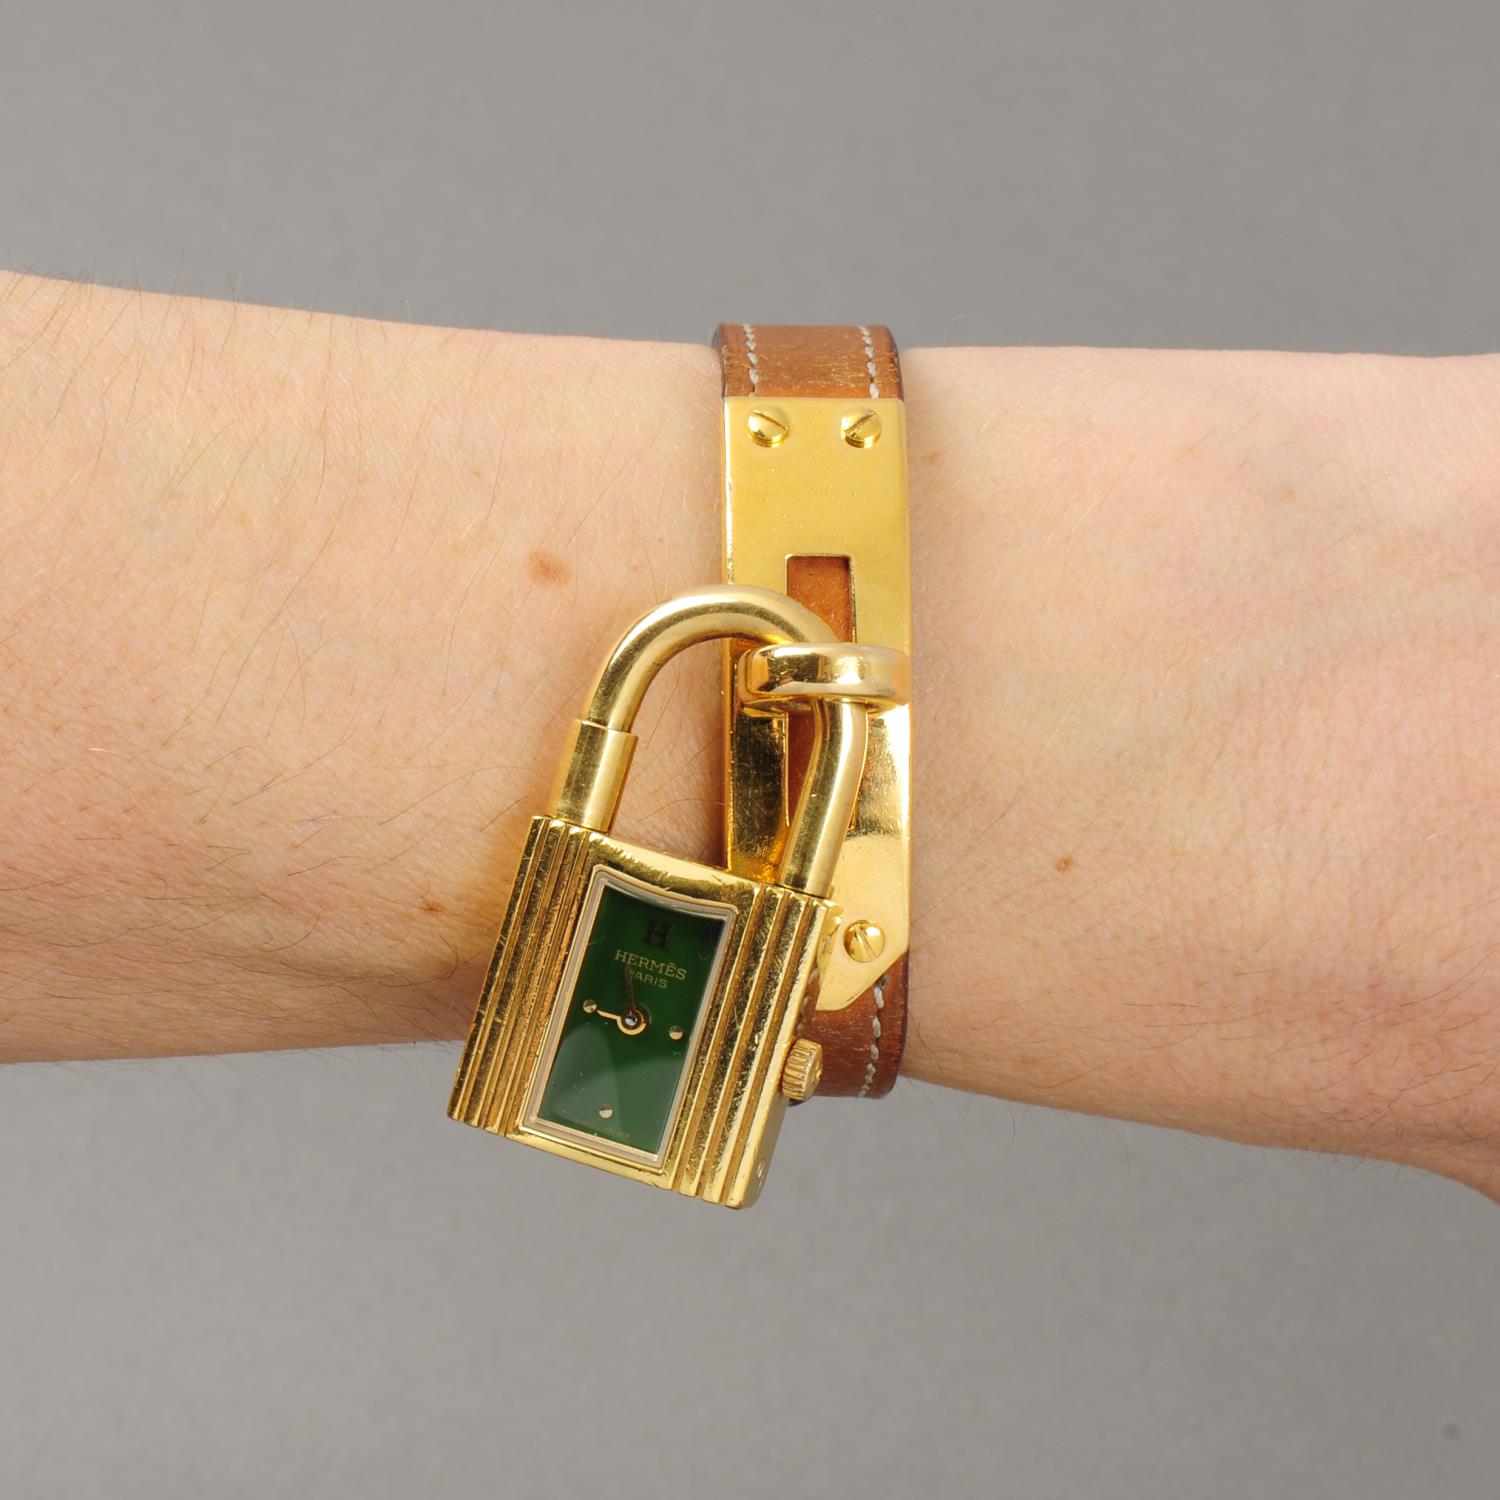 HERMÈS - a lady's Kelly wrist watch. Gold plated case. Reference KE1.201 39.01, serial 823677. - Image 3 of 5